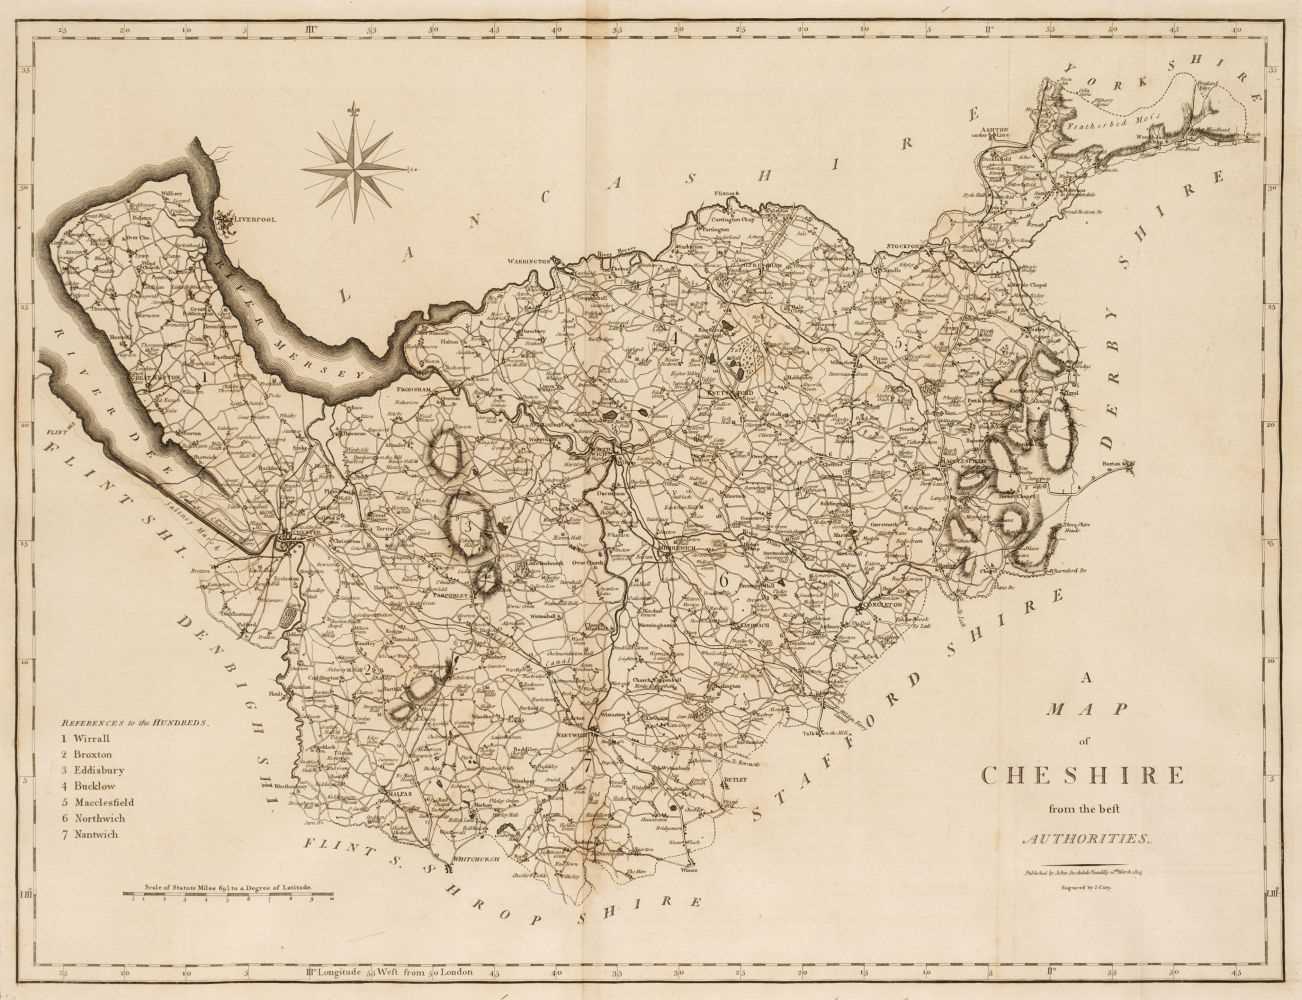 Lot 94 - Cary (John & Stockdale John). A Collection of 51 British County Maps, 1806